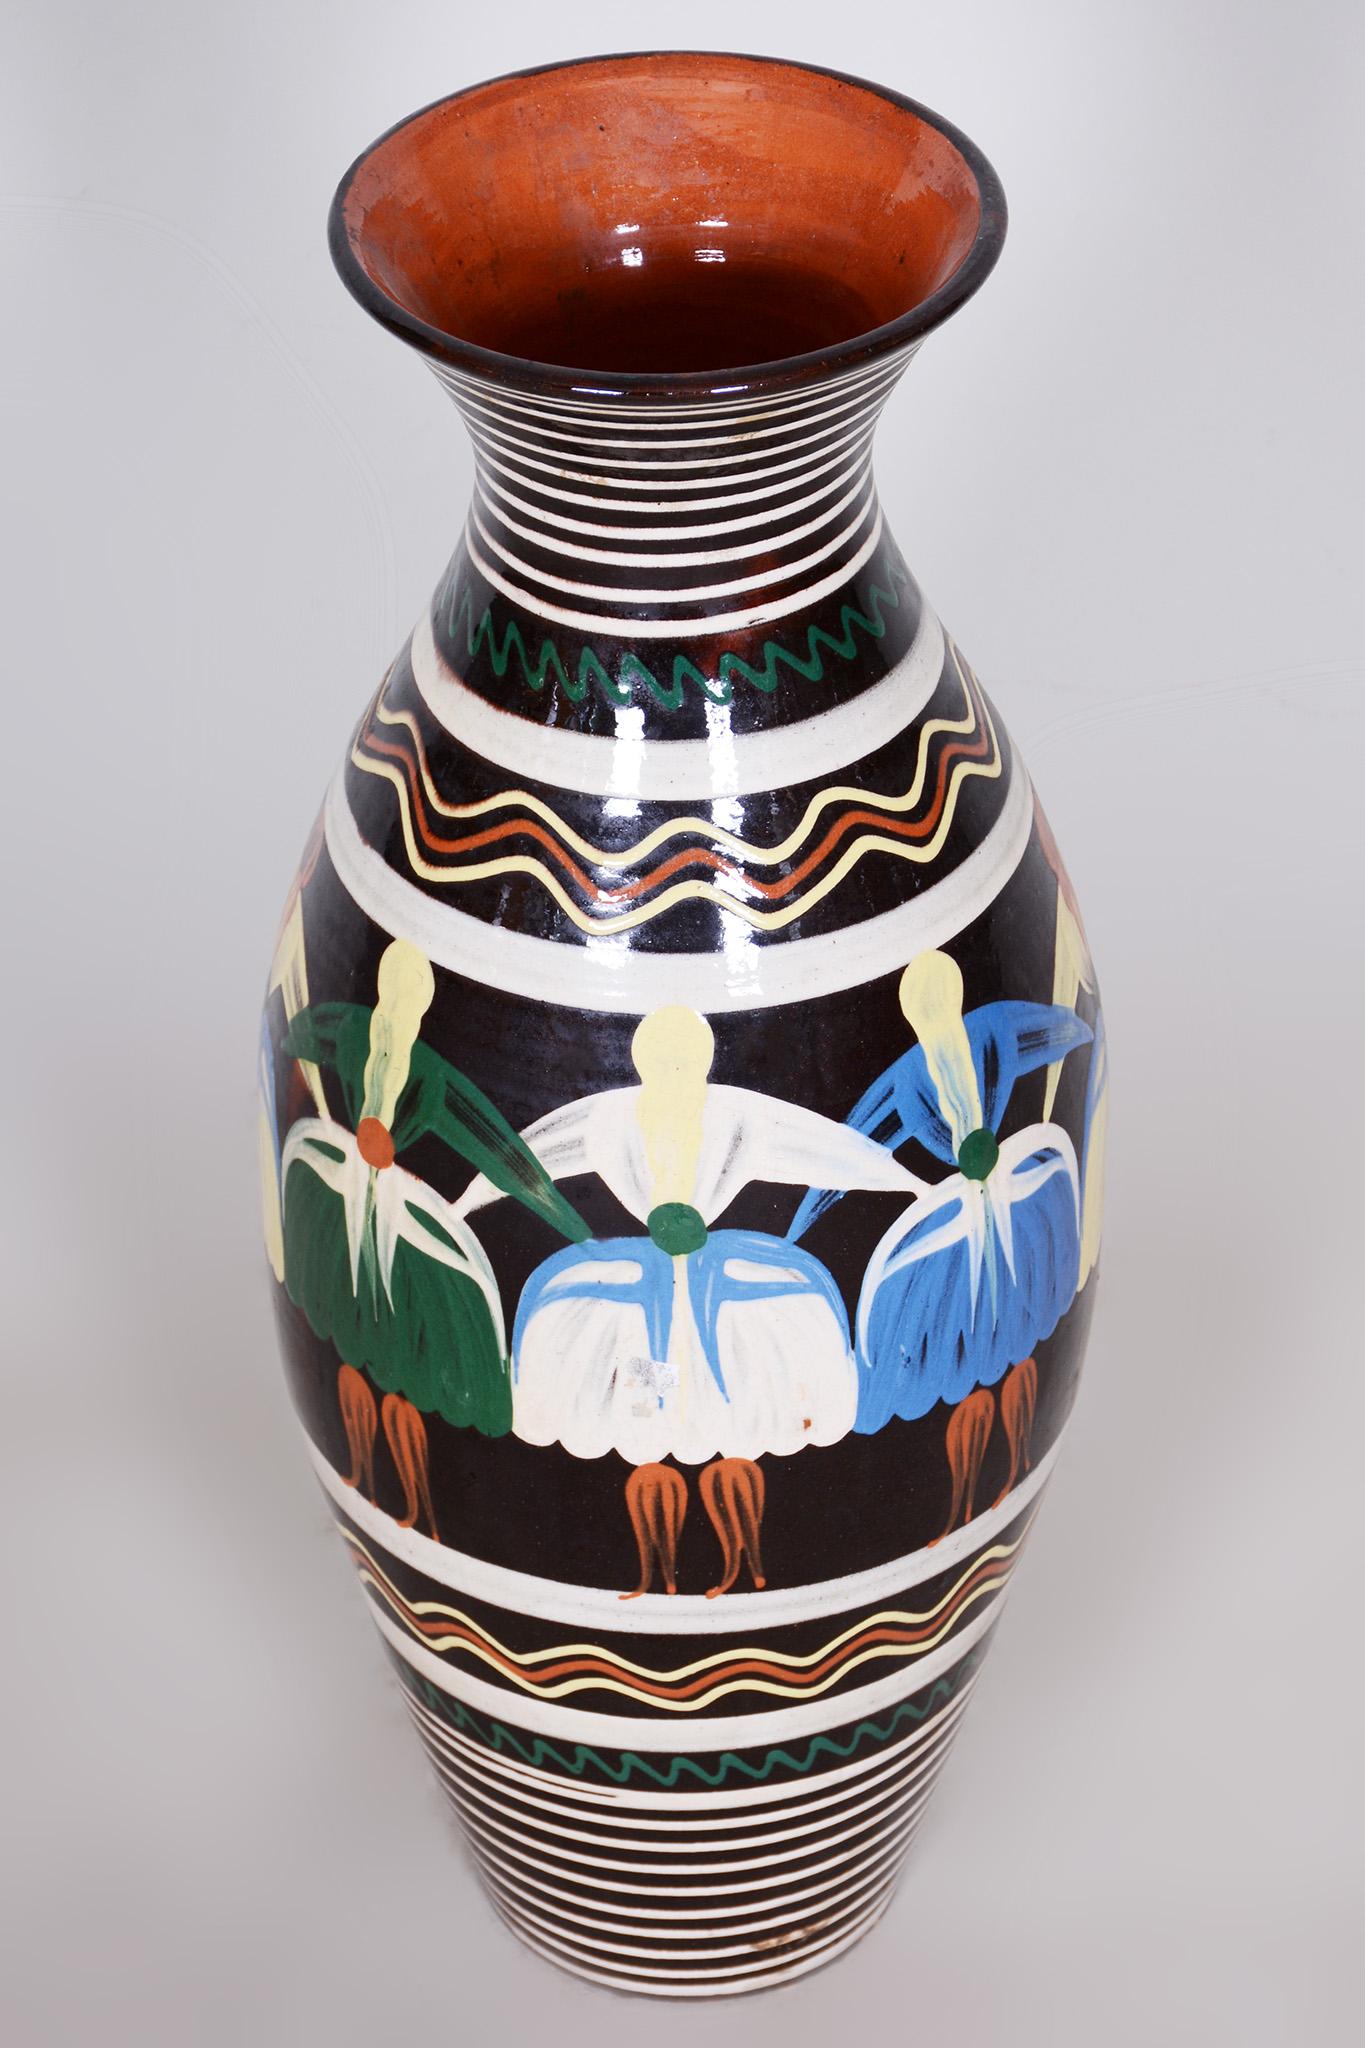 Ceramic Art Deco Vase Made in 1940s Czechia, Hand Painted Slovak Motifs For Sale